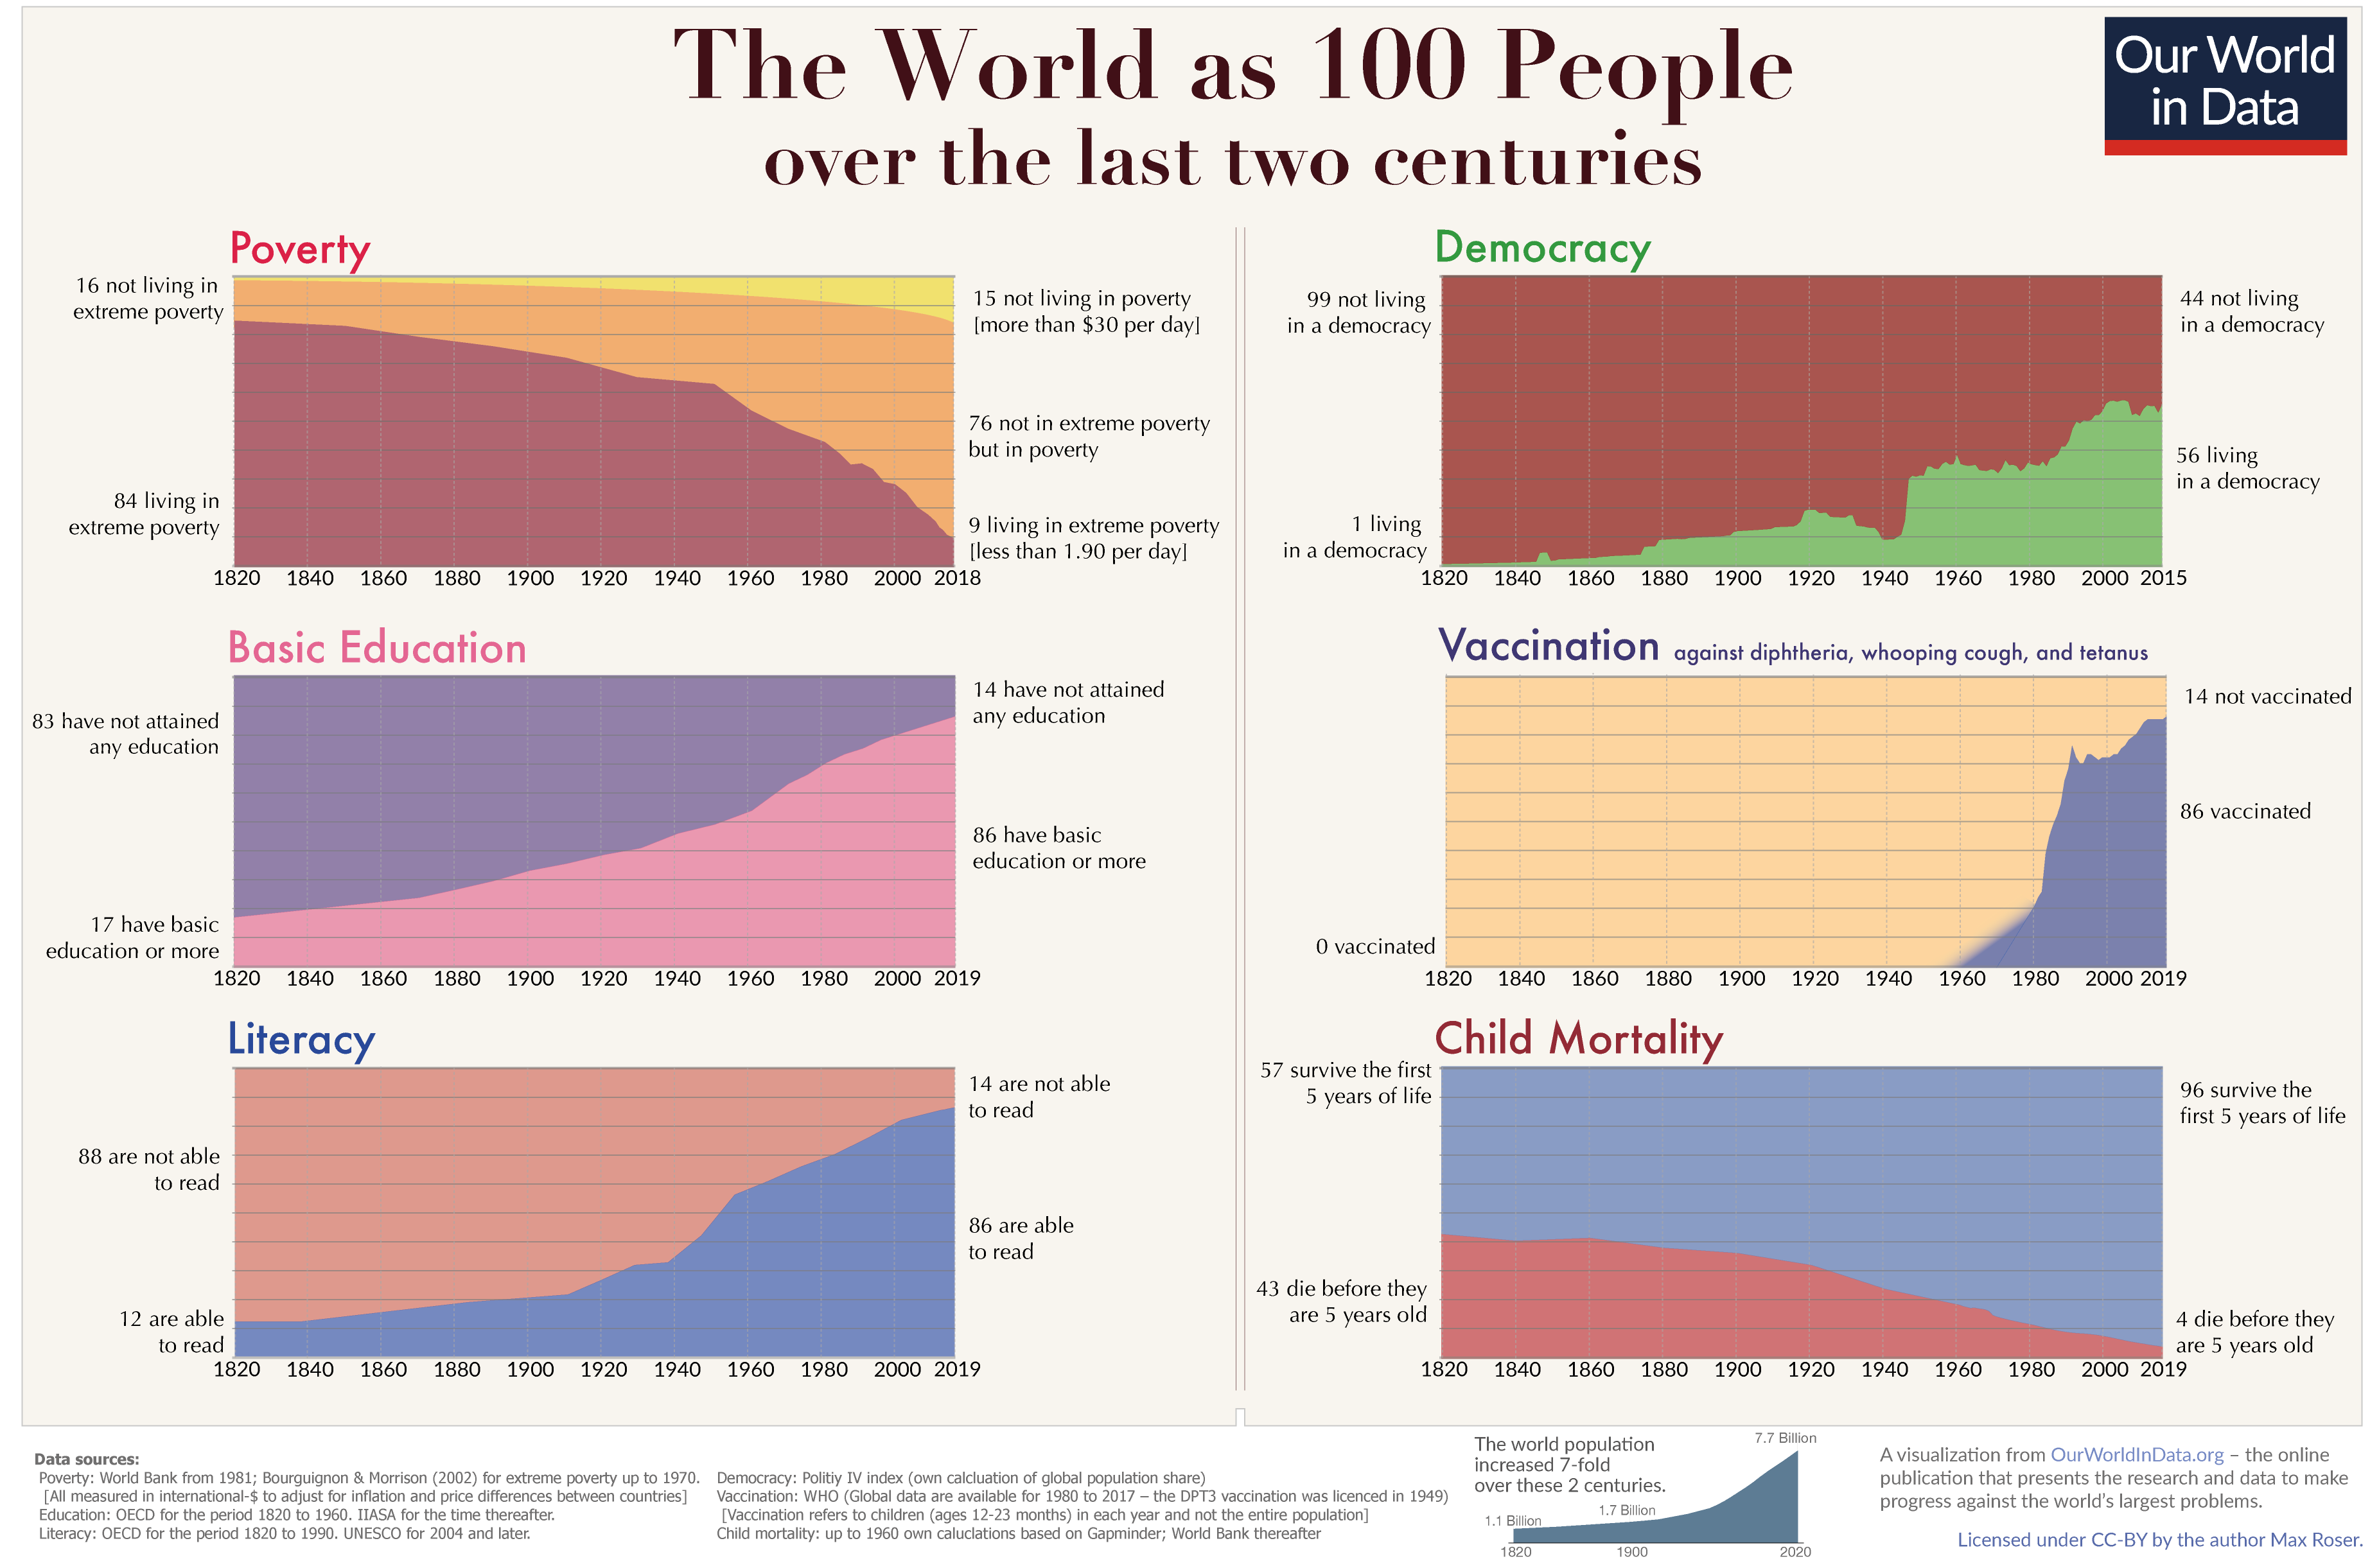 https://ourworldindata.org/uploads/2017/01/Two-centuries-World-as-100-people.png